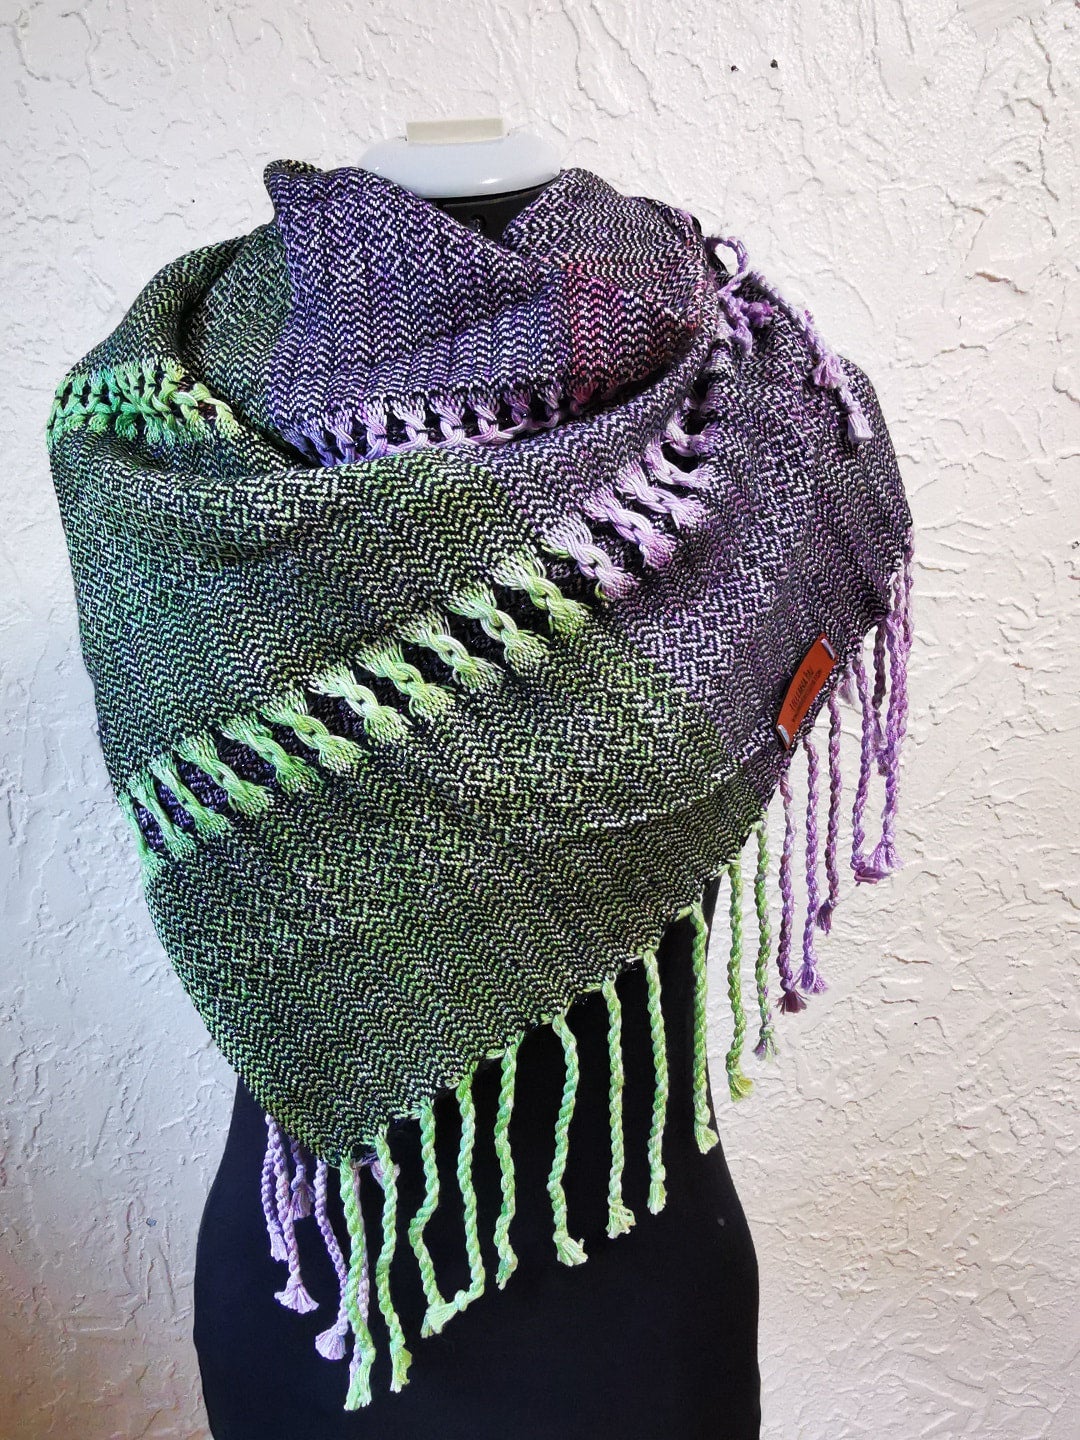 Purple Rainbow Handwoven Scarf in Hand Dyed Cozy Cotton and Silk